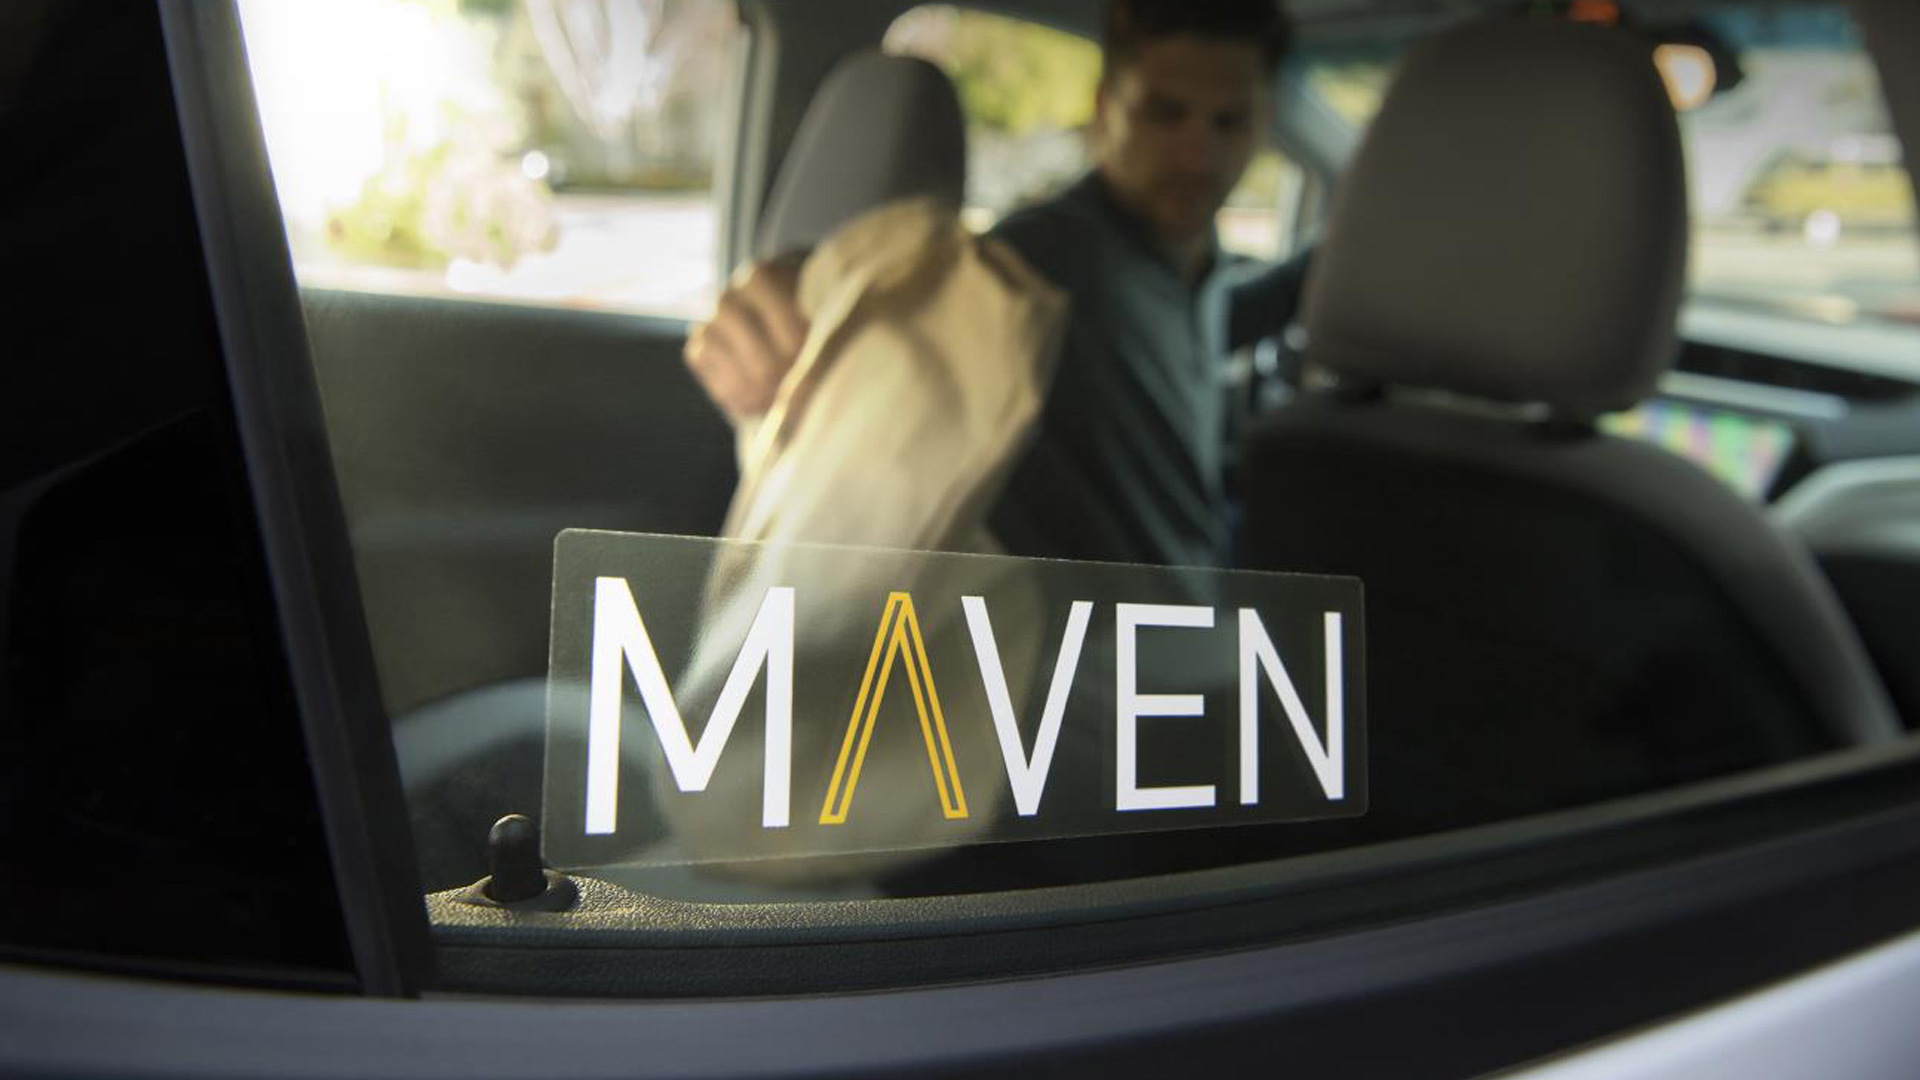 2017 Chevrolet Bolt EV added to Maven car- and ride-sharing fleet in Los Angeles, California